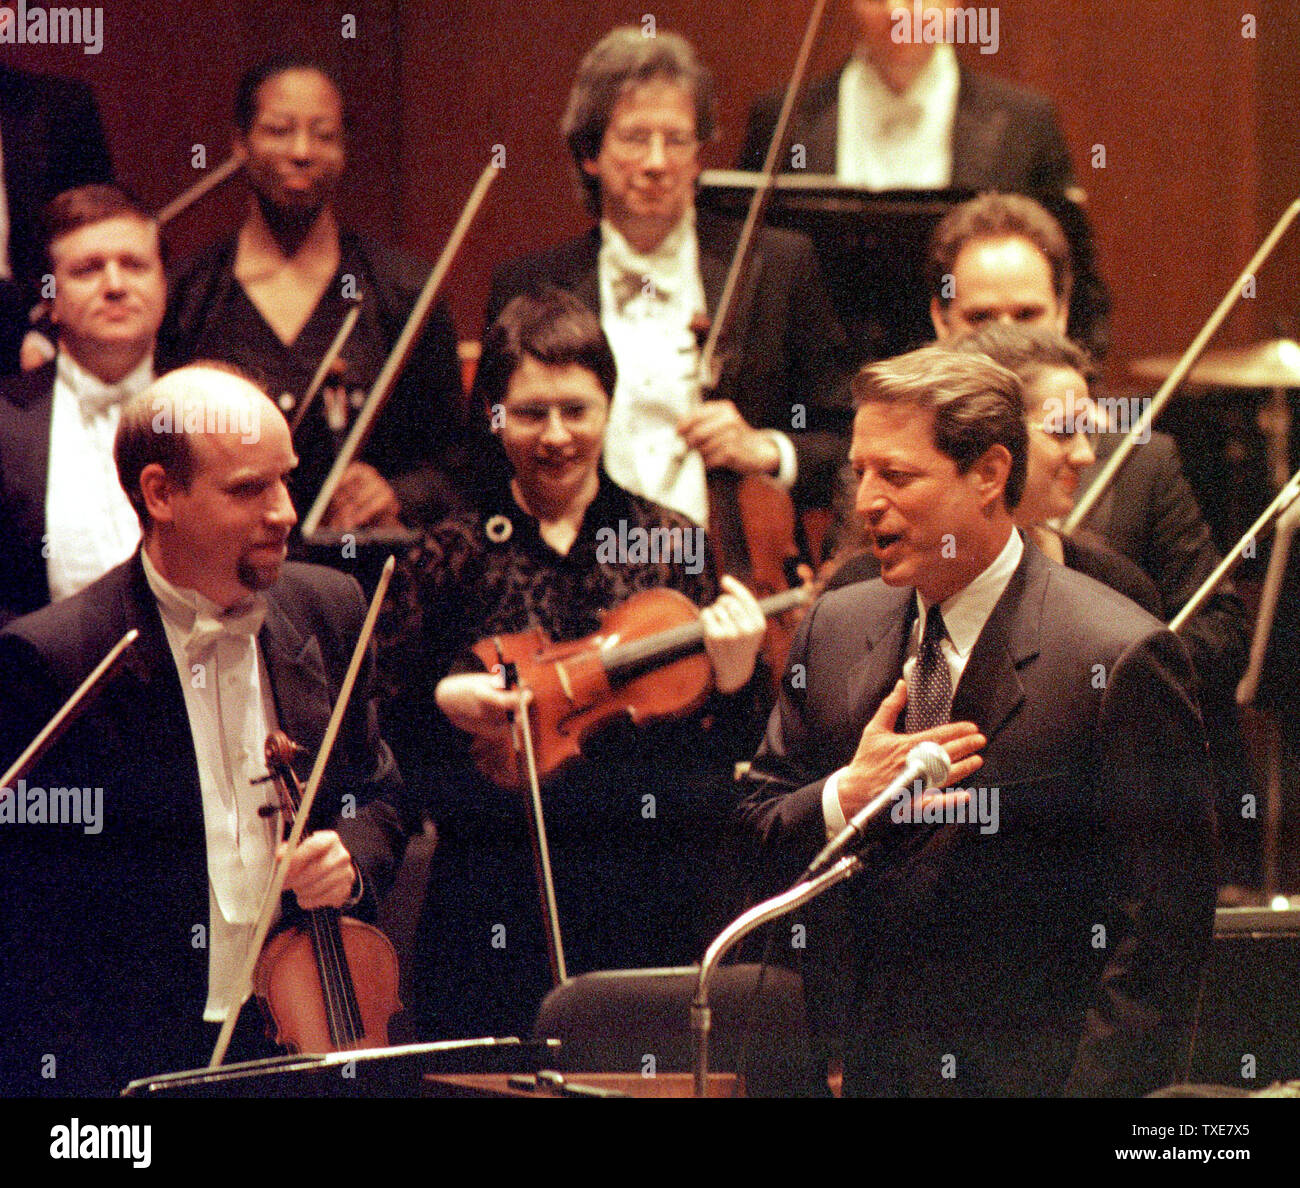 NYP2000020806 - 08 FEBRUARY 2000- NEW YORK, NEW YORK, USA: Vice President Al Gore chats with members of the American Symphony Orchestra after narrating Aaron Copland's 'Lincoln Portrait', February 7, at the Lincoln Center's Avery Fisher hall.  jr/ep/James Belvin  UPI Stock Photo